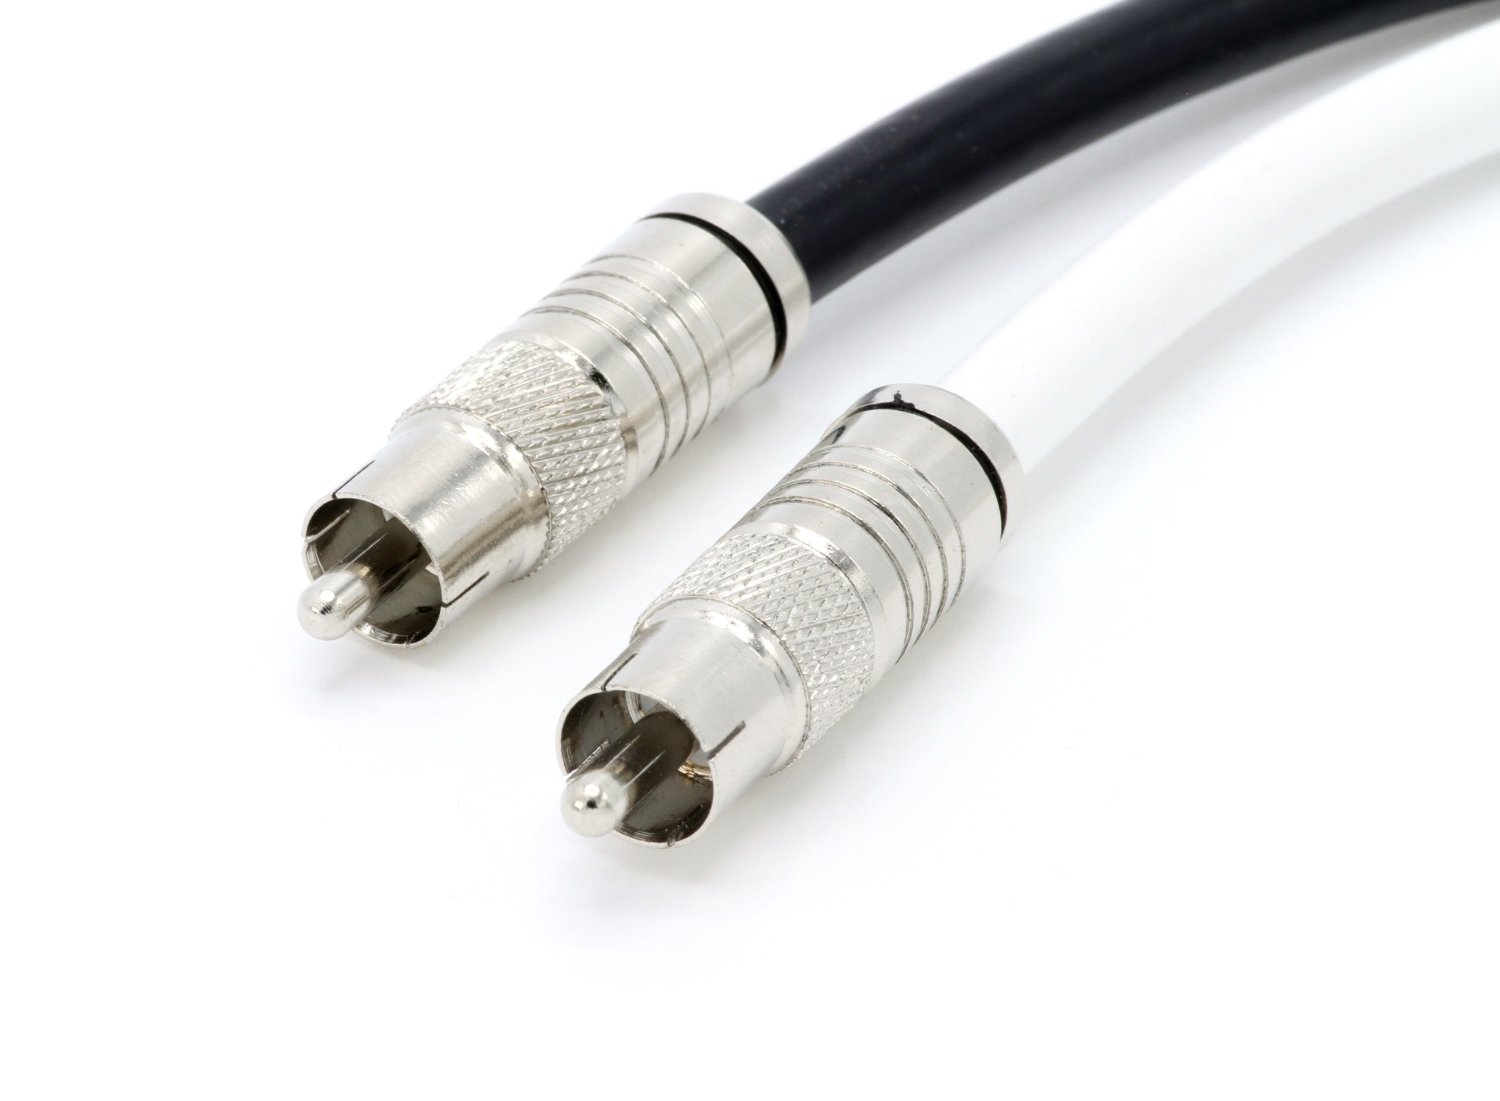 THE CIMPLE CO - White Digital Audio Coaxial Cable Subwoofer Cable - (S/PDIF) RCA Cable, 200 Feet - image 5 of 6